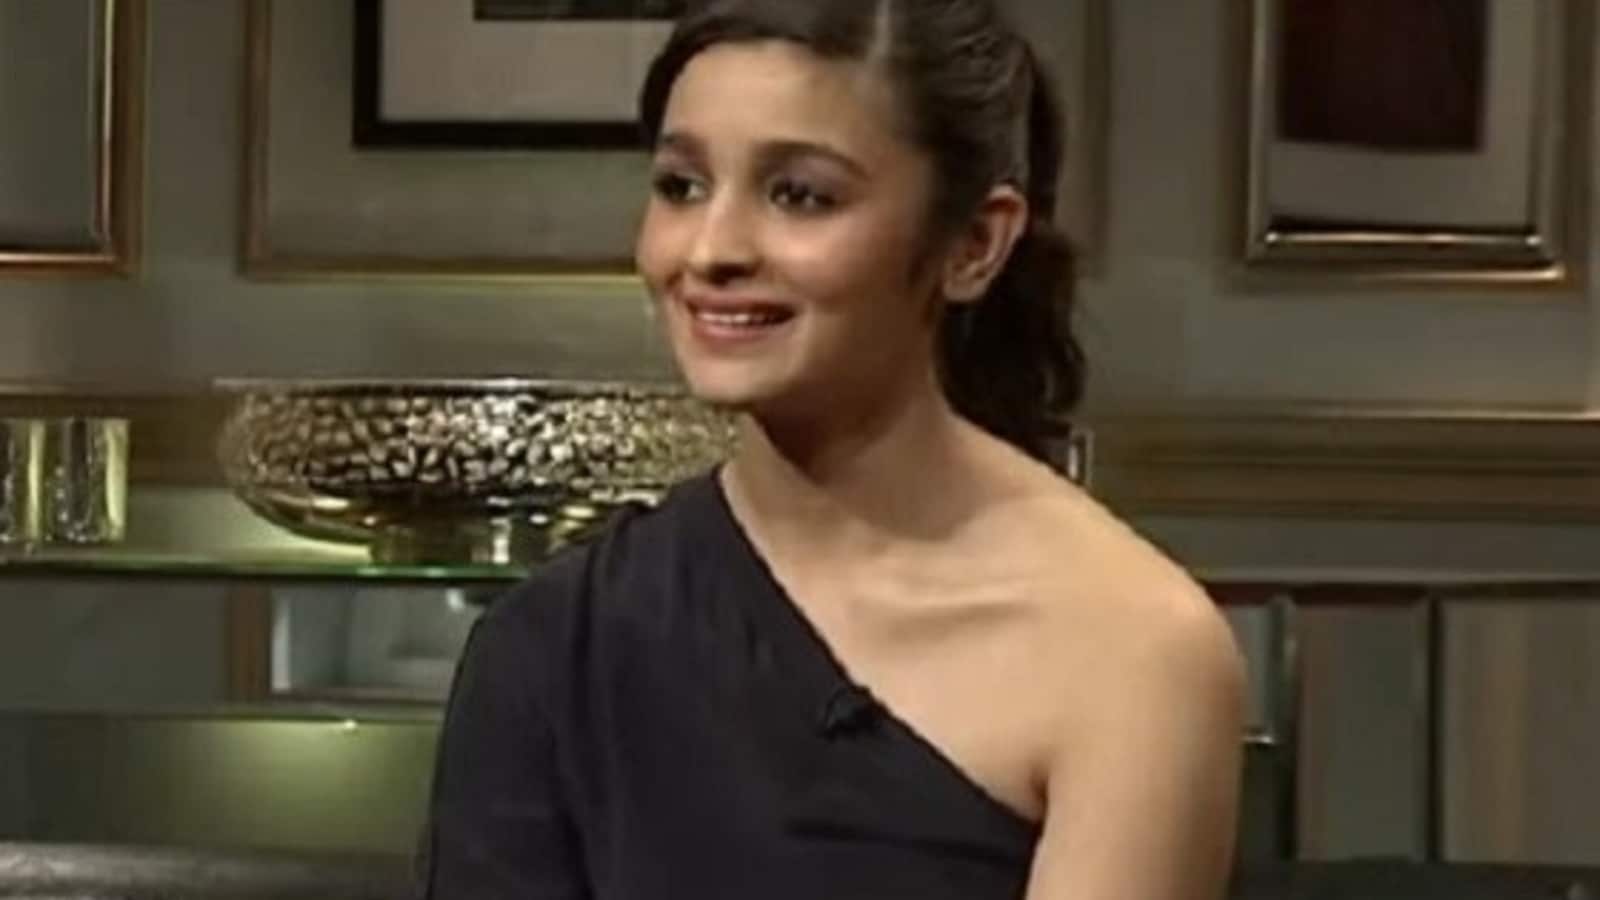 When Alia Bhatt called Valentine’s Day ‘overrated’, opened up about a bad date | Bollywood